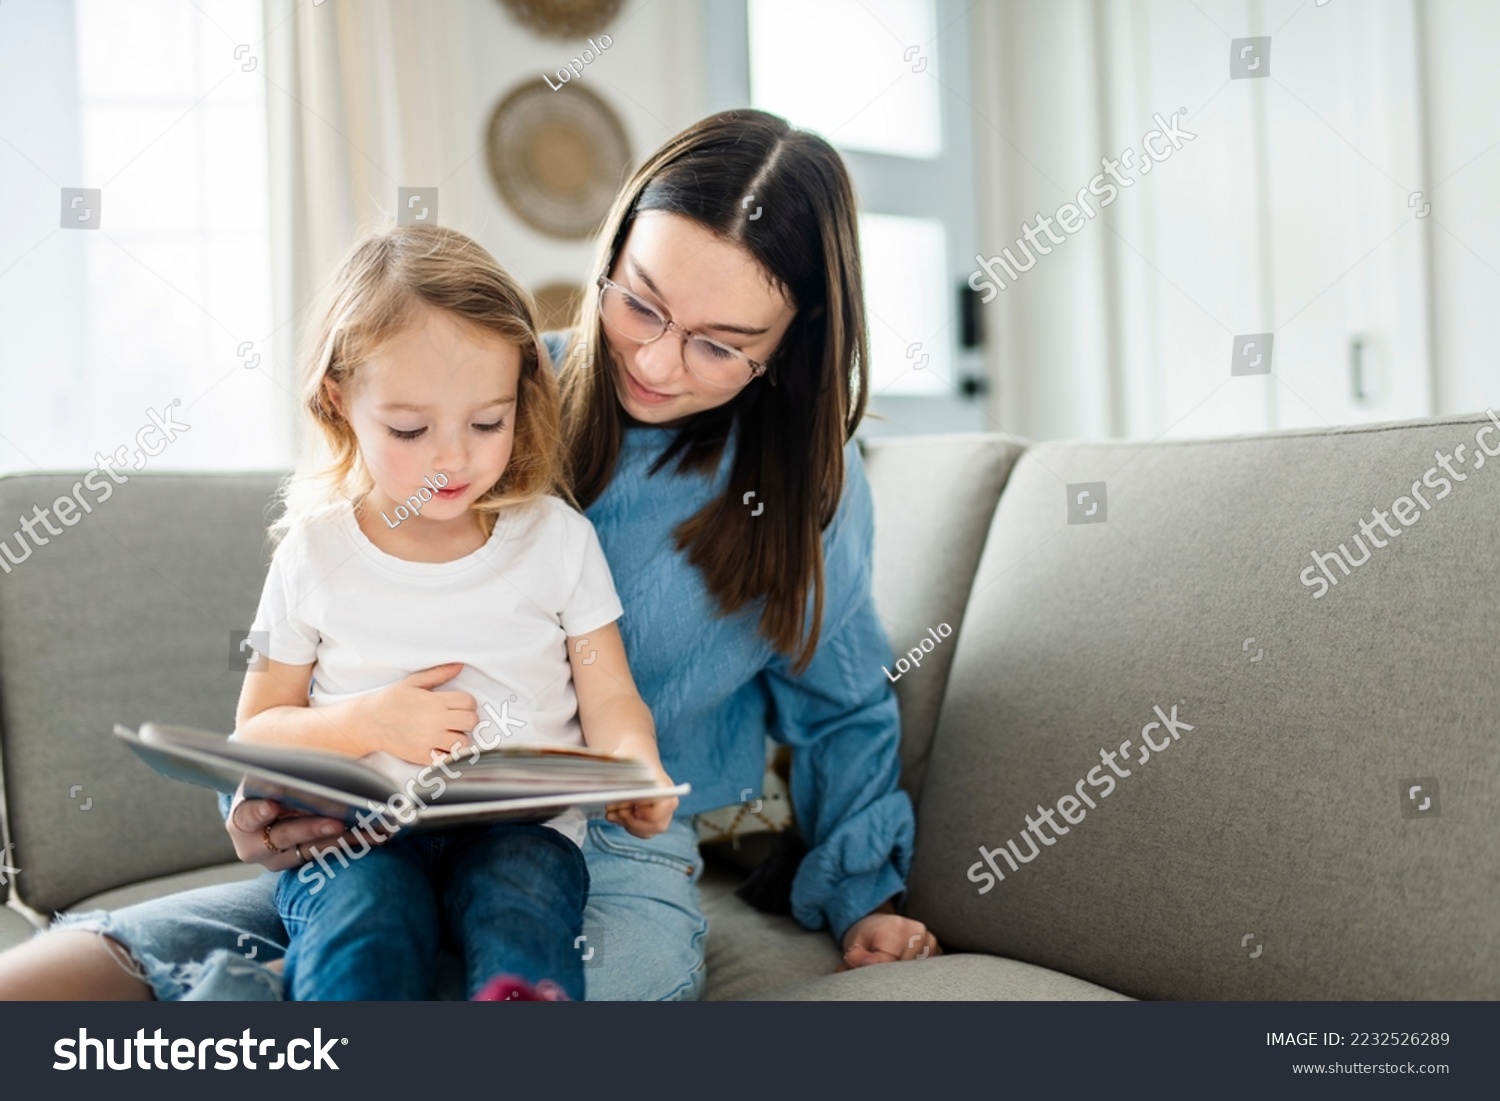 A happy kid sitting on sofa with babysitter holding book #2232526289